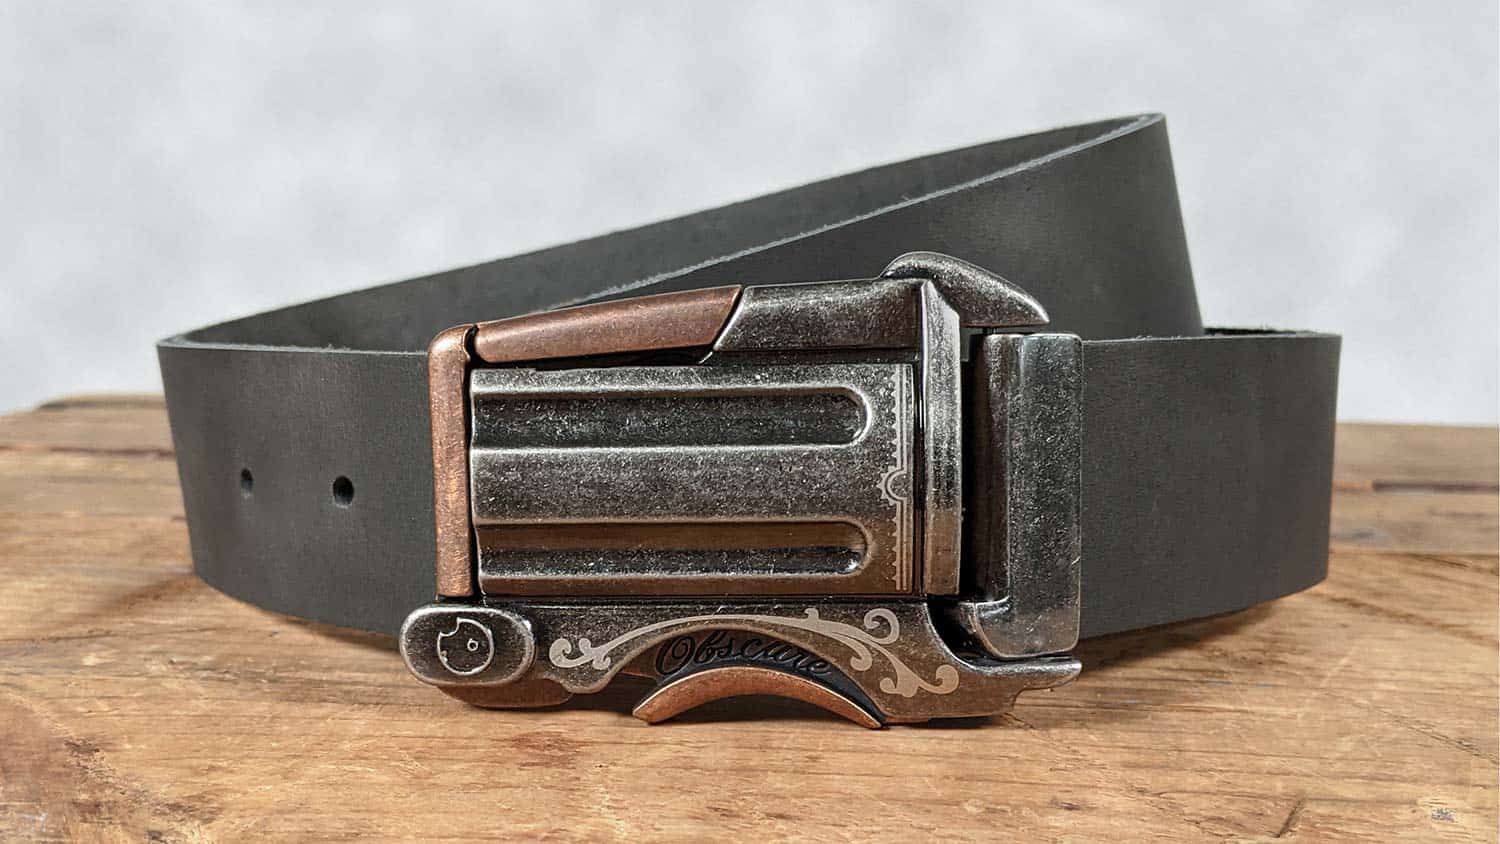 western revolver gun belt buckle with click button lock on handmade leather belt. heavy duty hardware, thick weight leather.